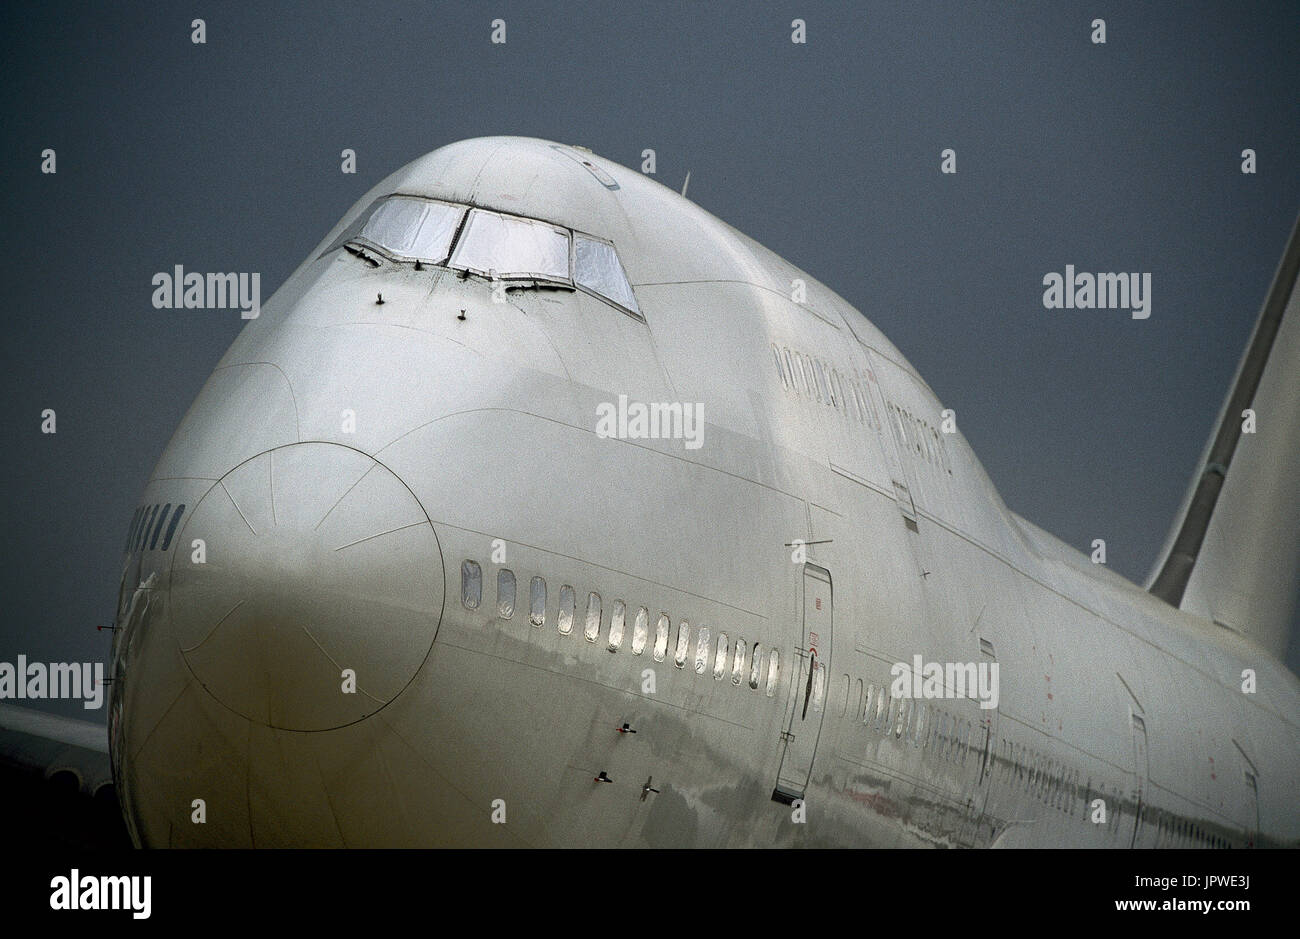 desert-storage of a white livery Boeing 747-300 parked with all logos removed and silver foil protective-covers over the windows due to the economic r Stock Photo